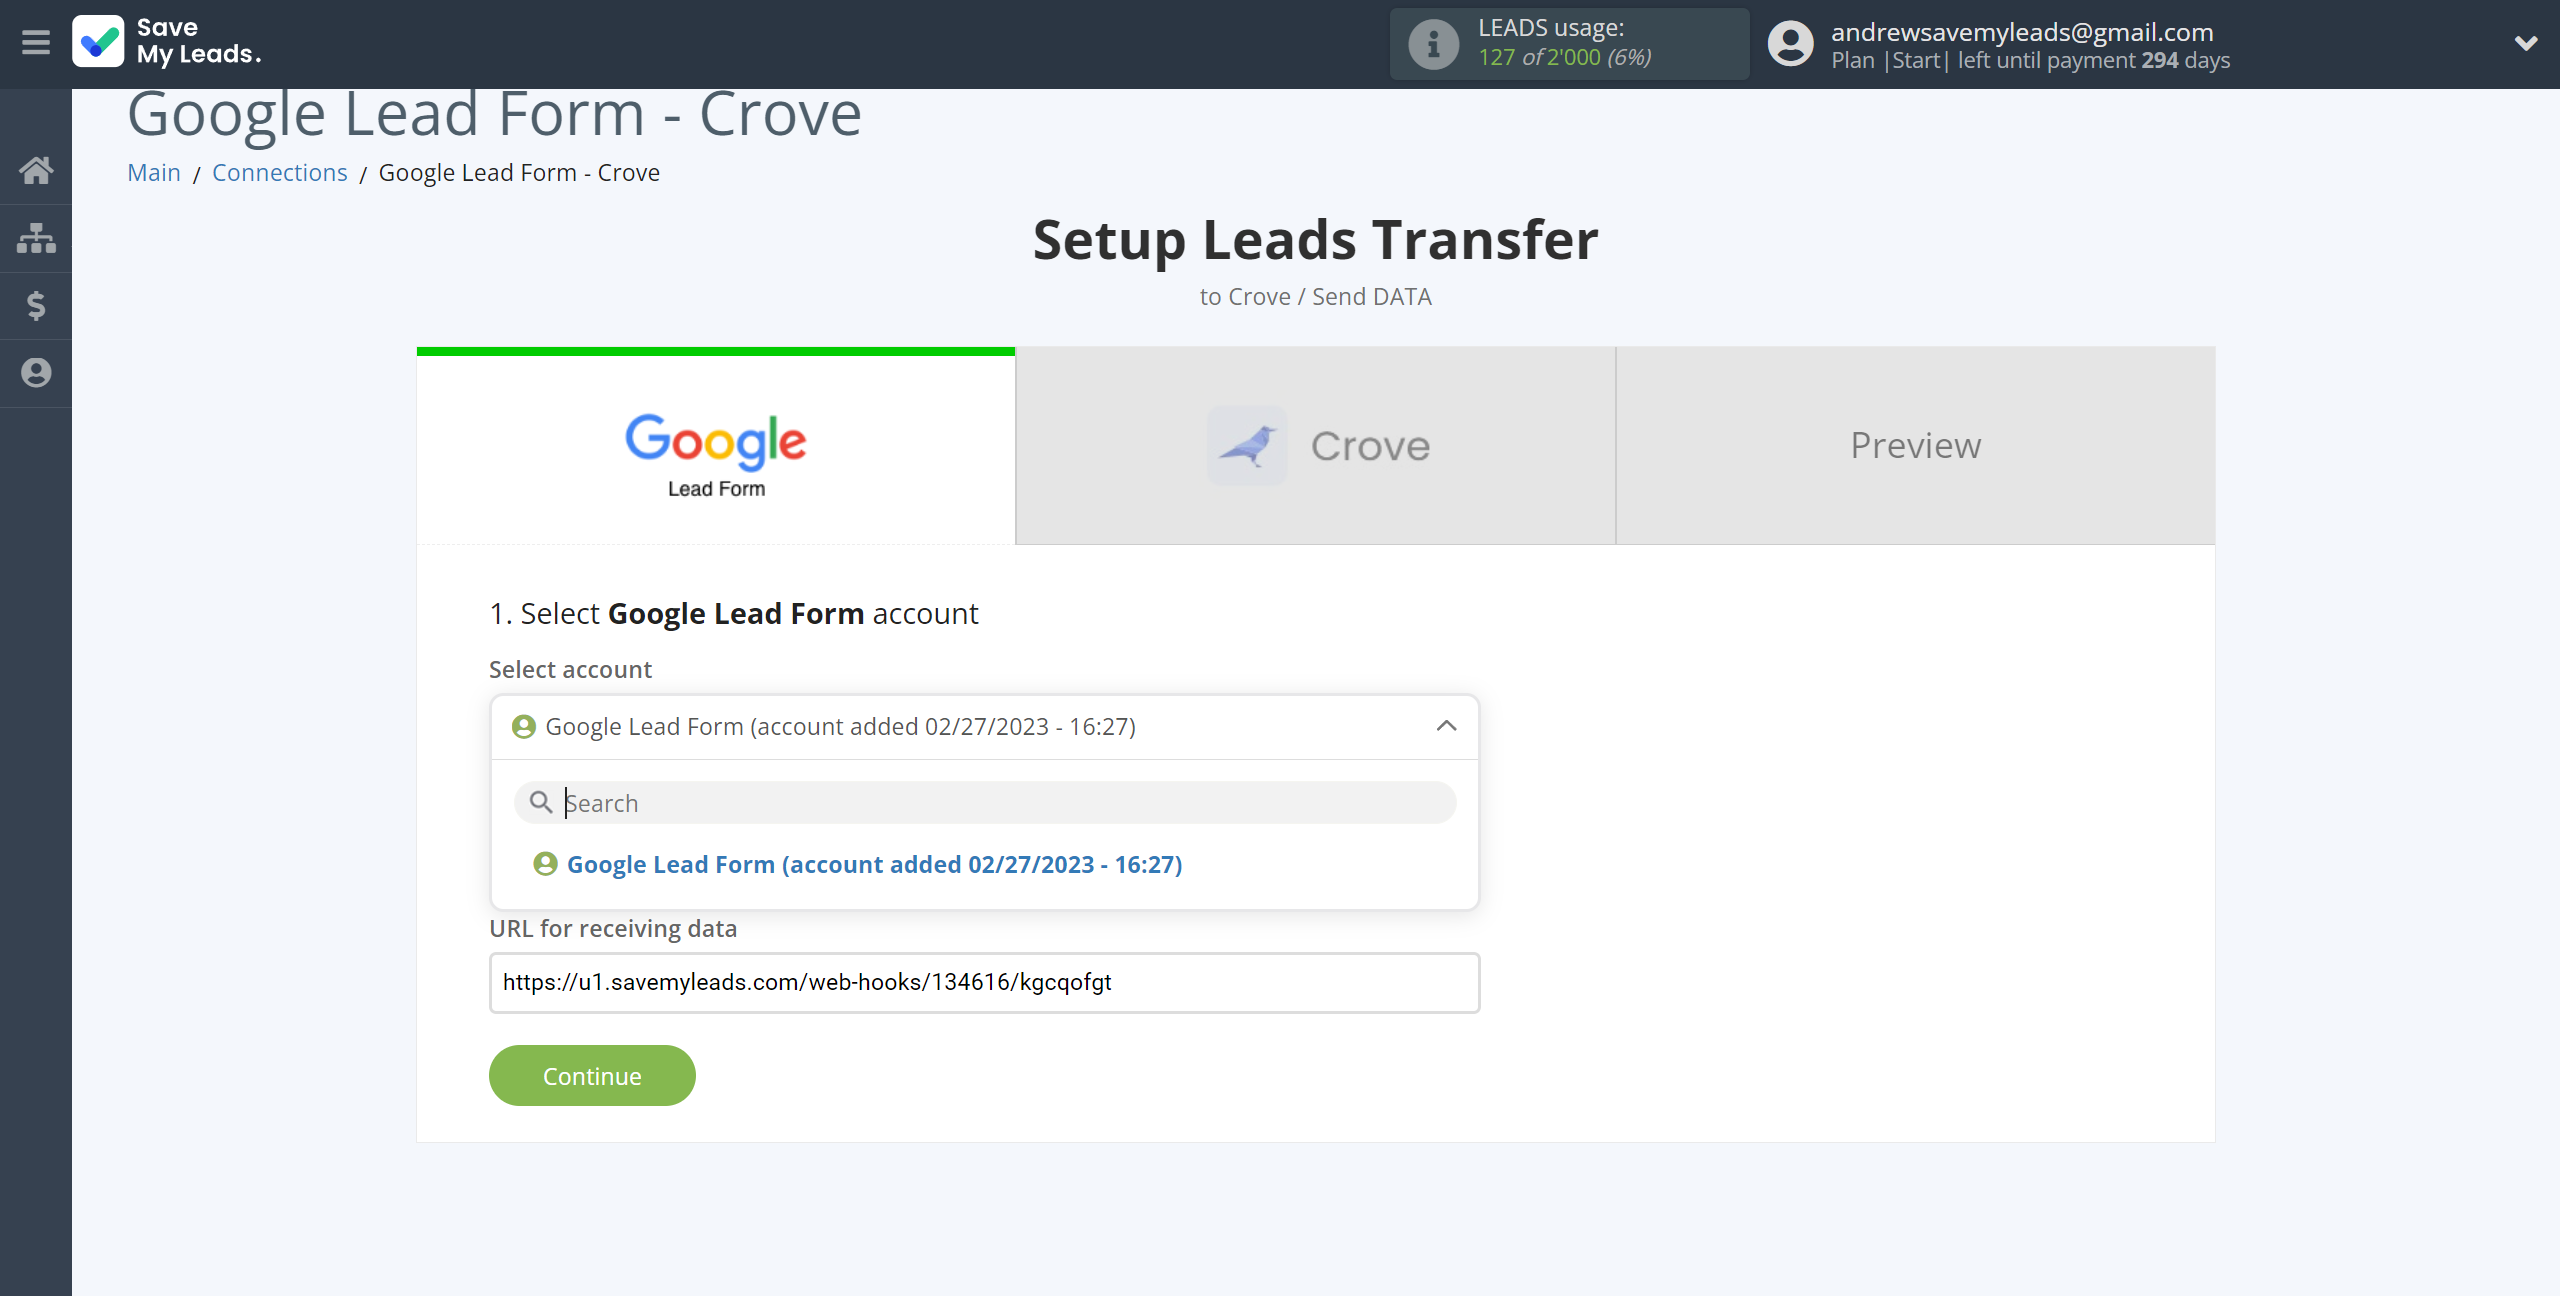 How to Connect Google Lead Form with Crove | Data Source account selection